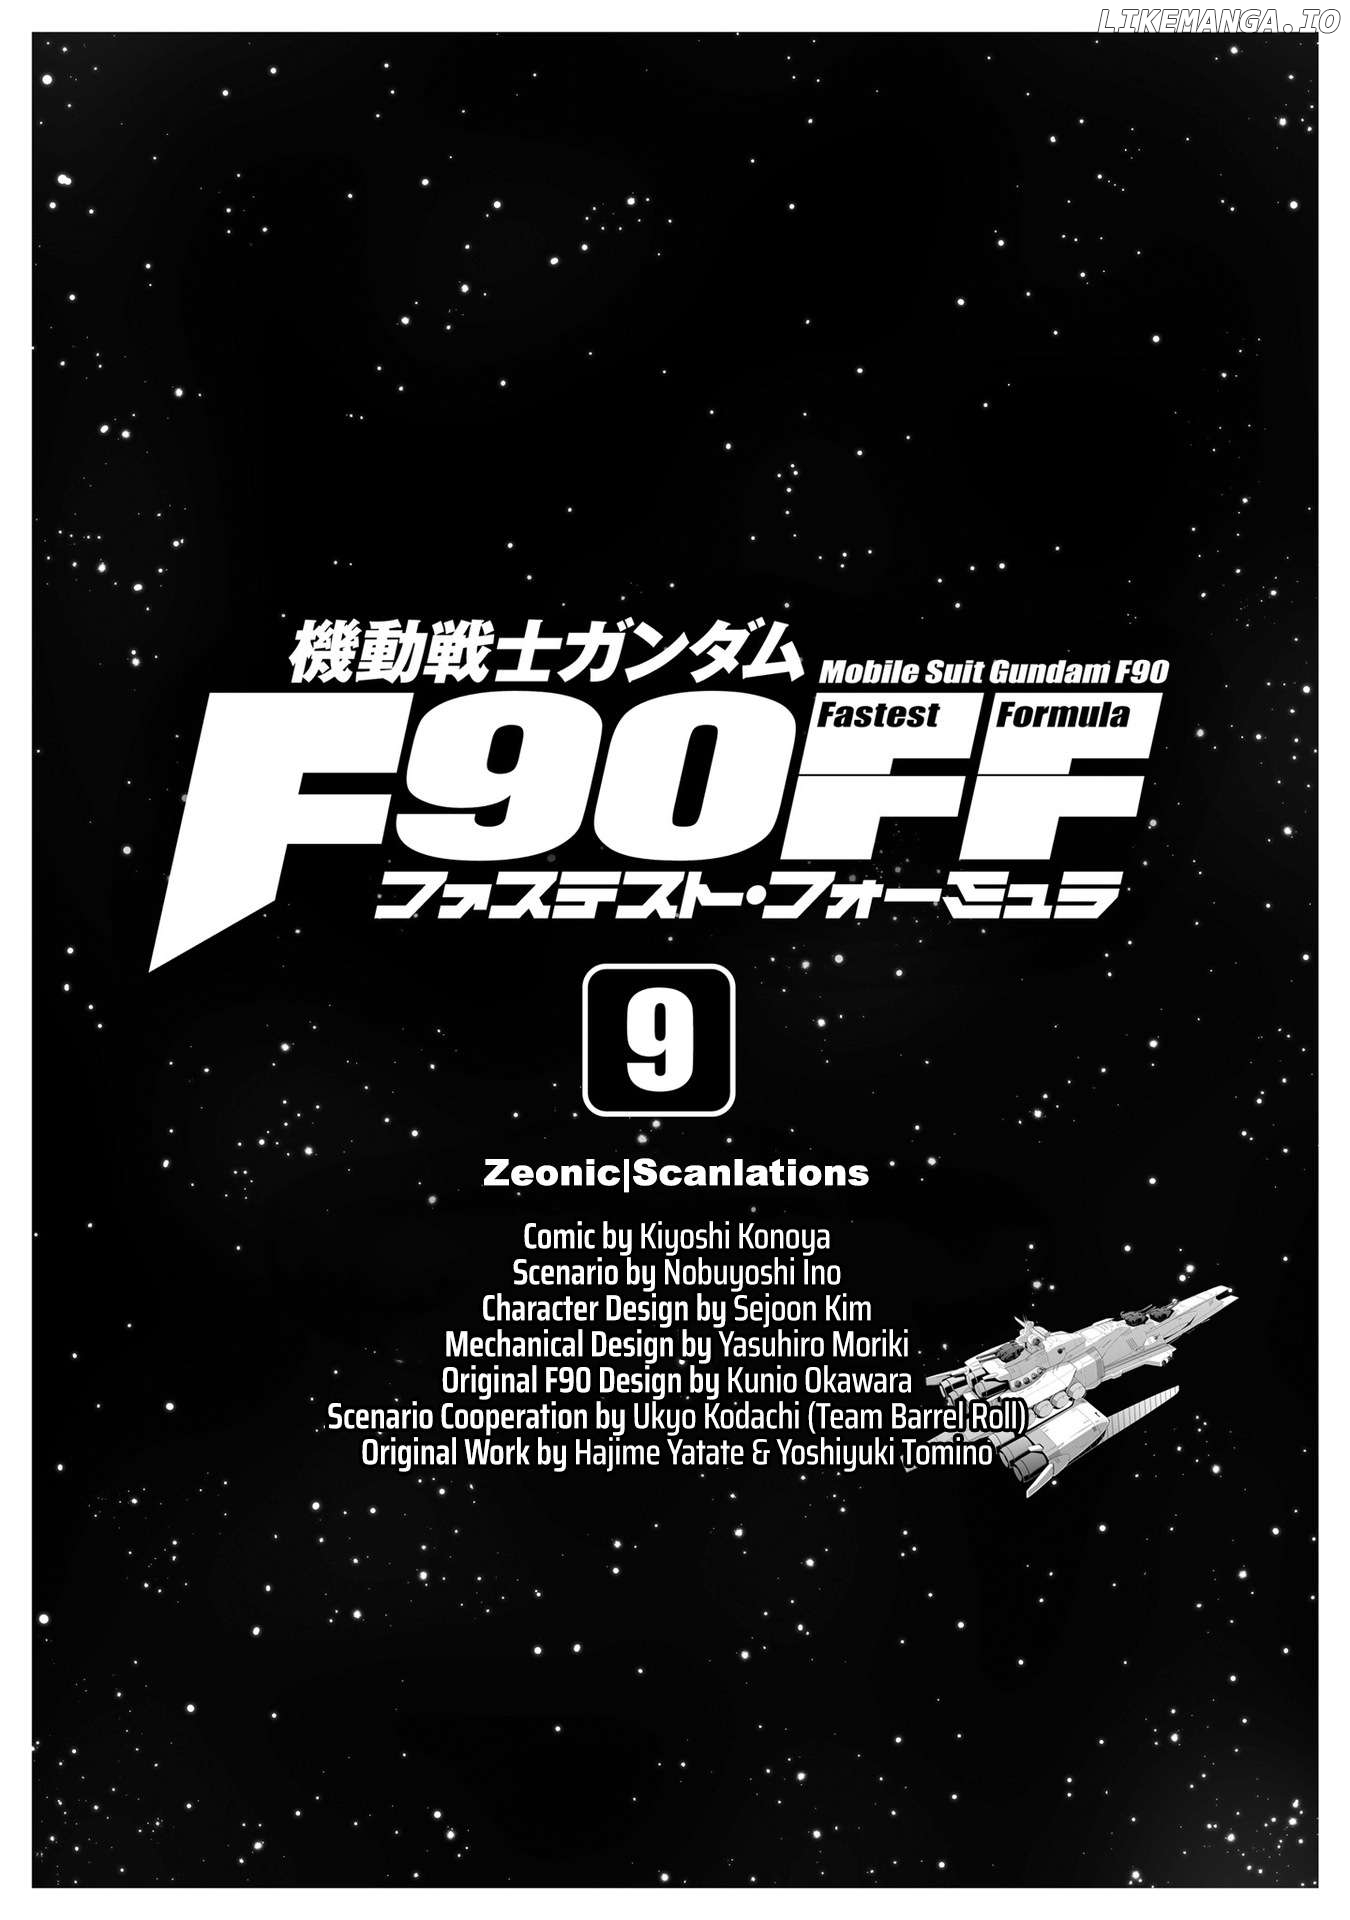 Mobile Suit Gundam F90 FF Chapter 33.5 - page 2